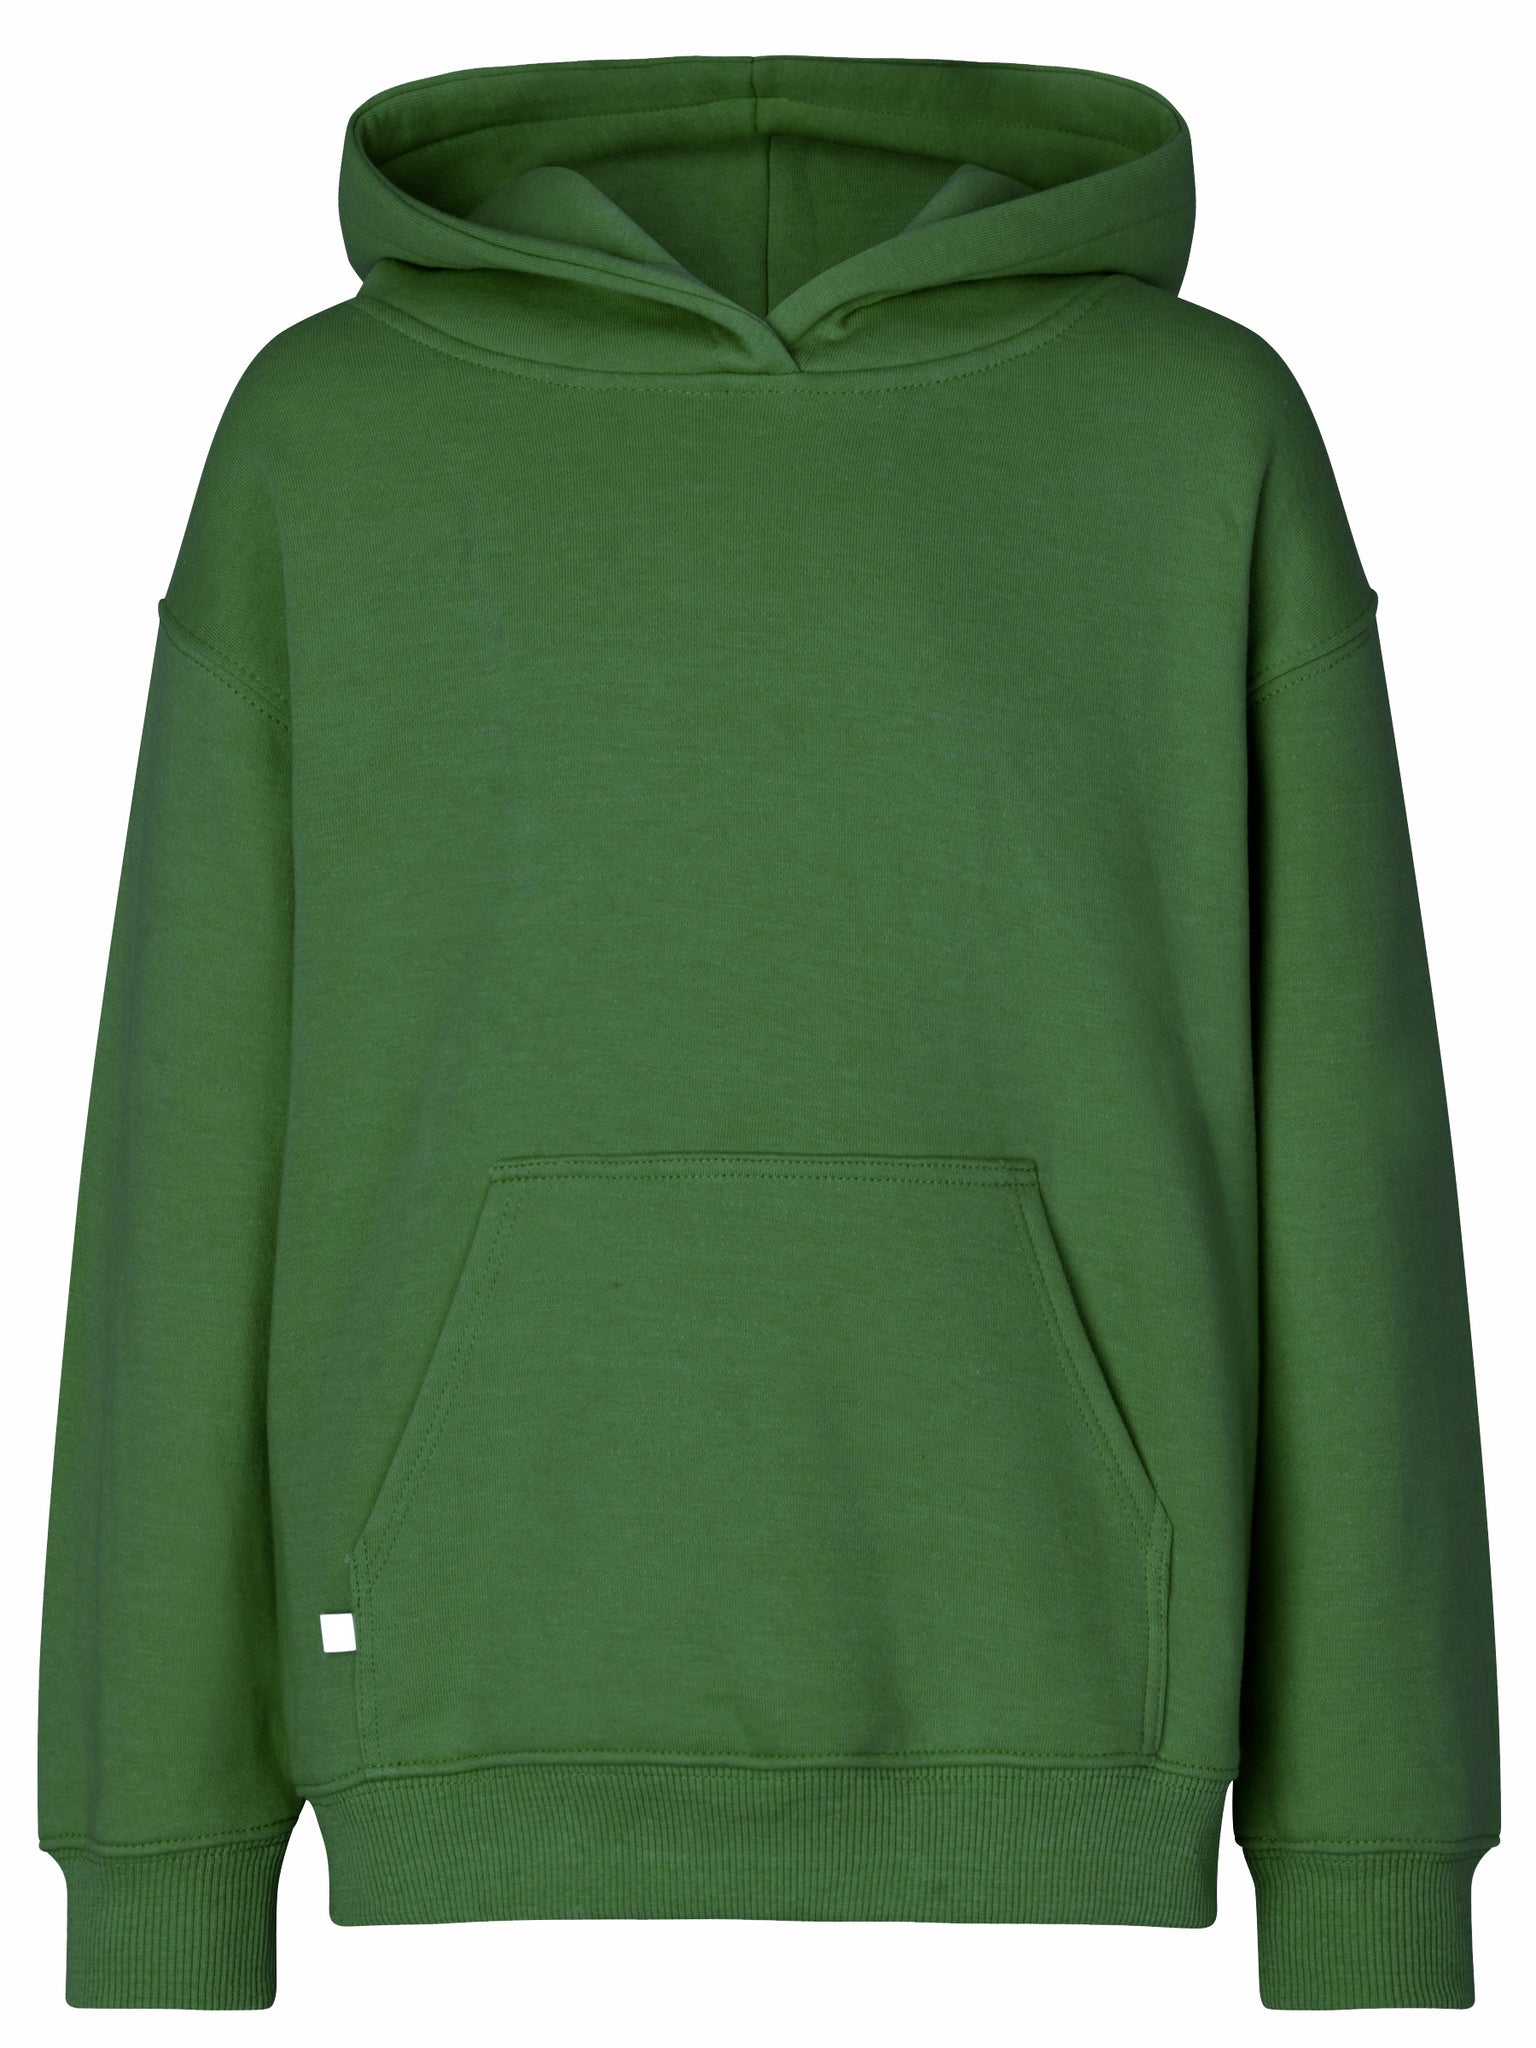 Hoodie for girls